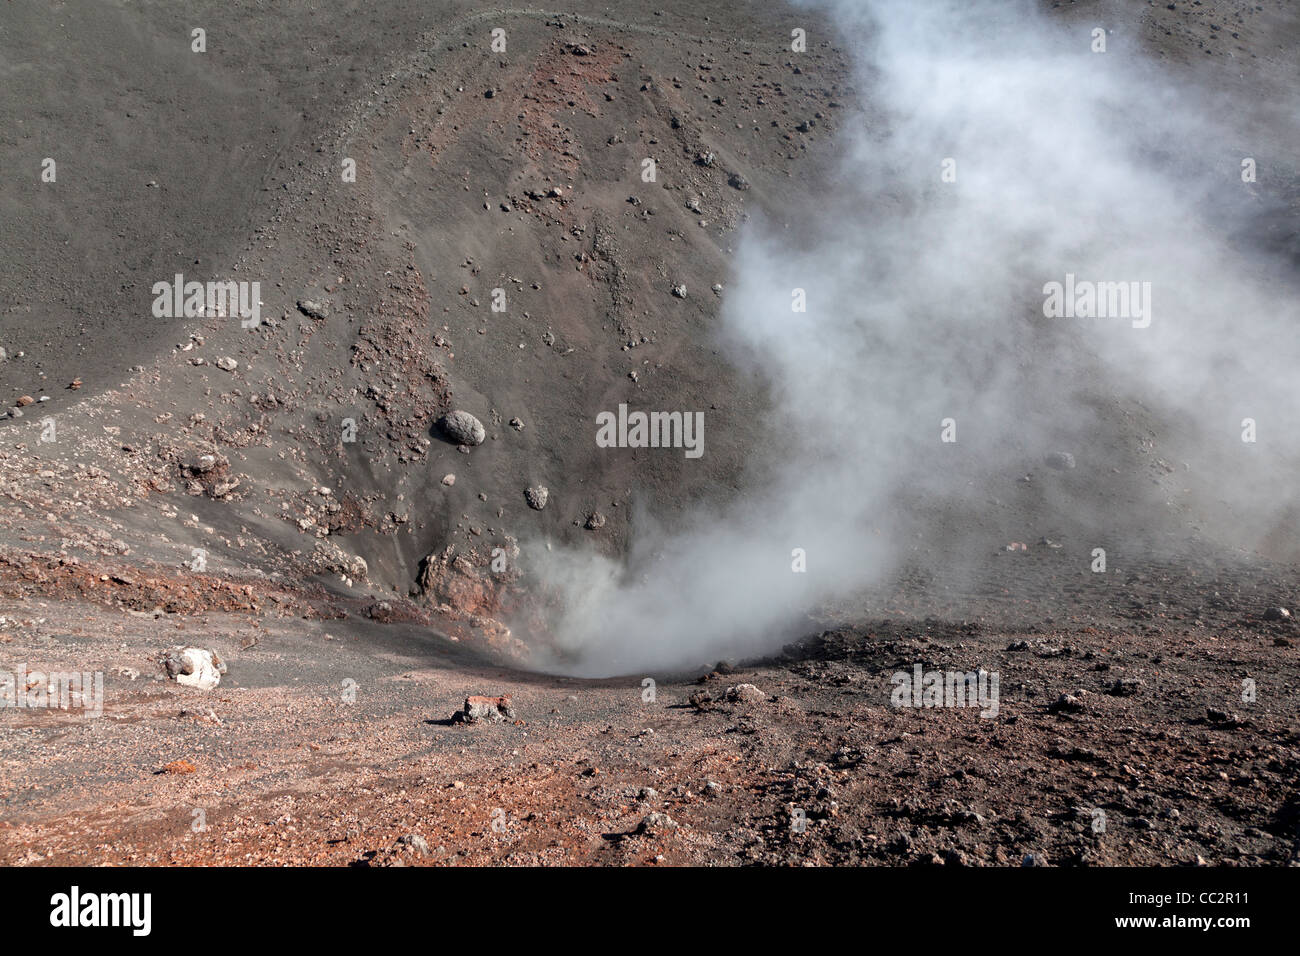 Volcanic crater from Mount Etna, Sicily, Italy Stock Photo